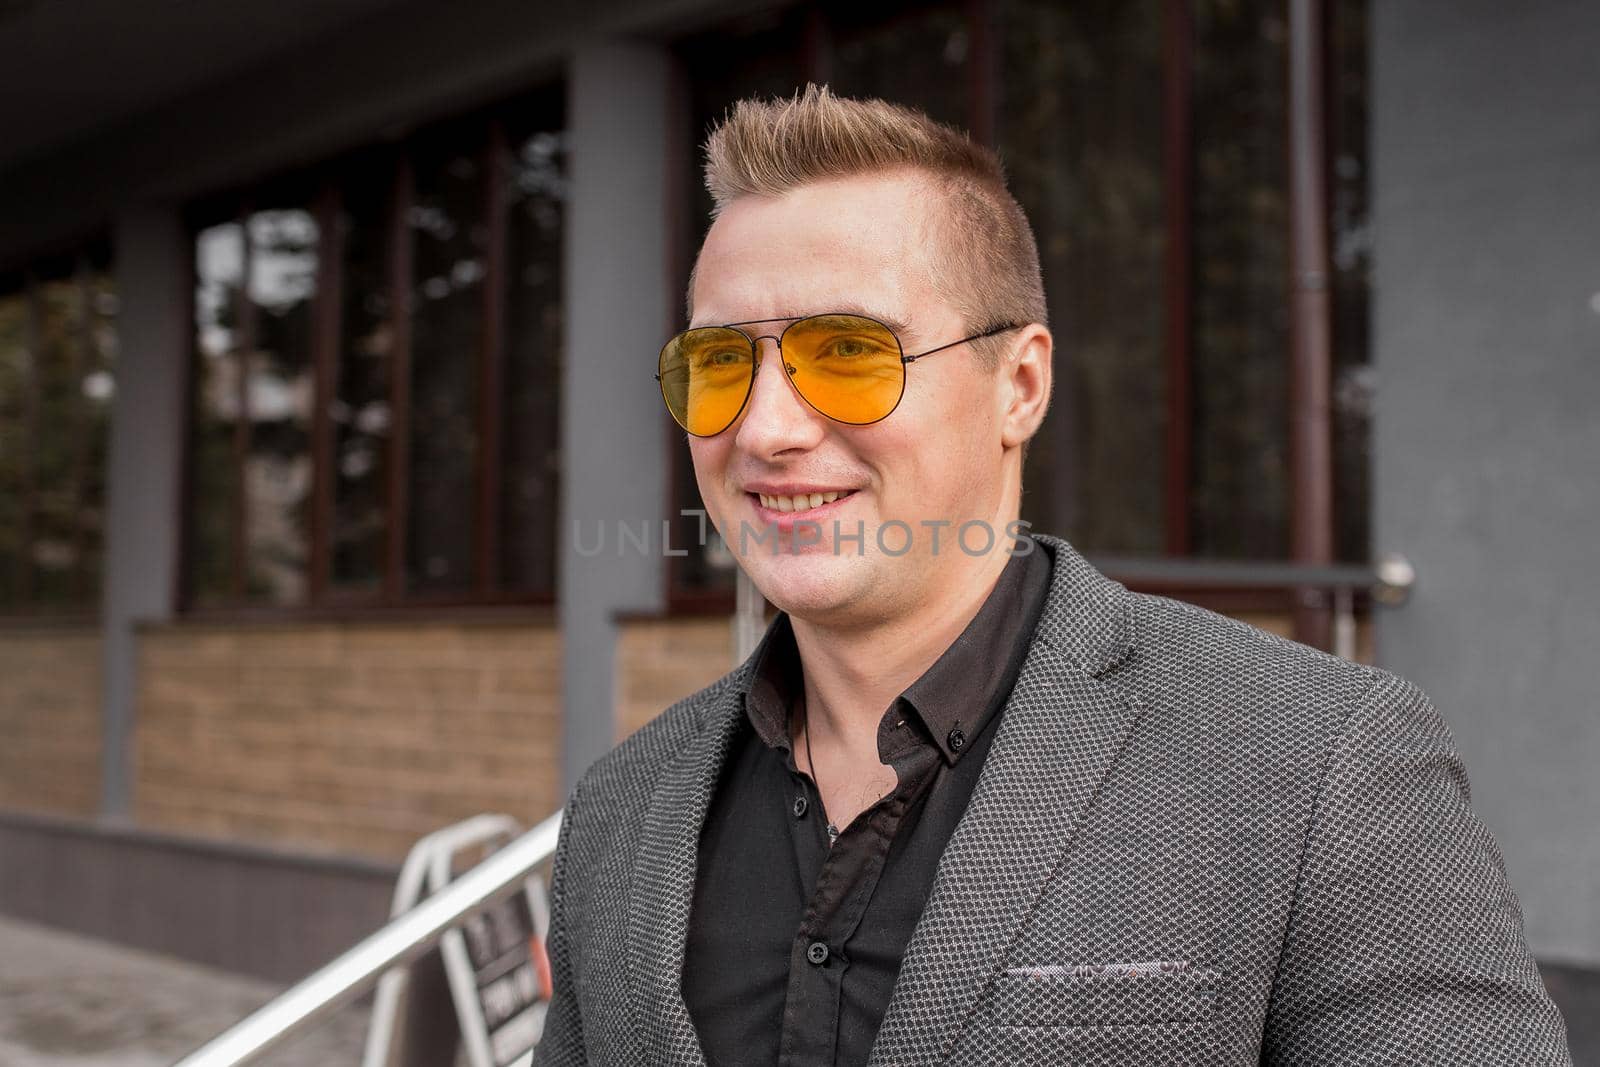 Smiling stylish young guy businessman of European appearance in a gray jacket and black shirt portrait in glasses on the street outdoor.